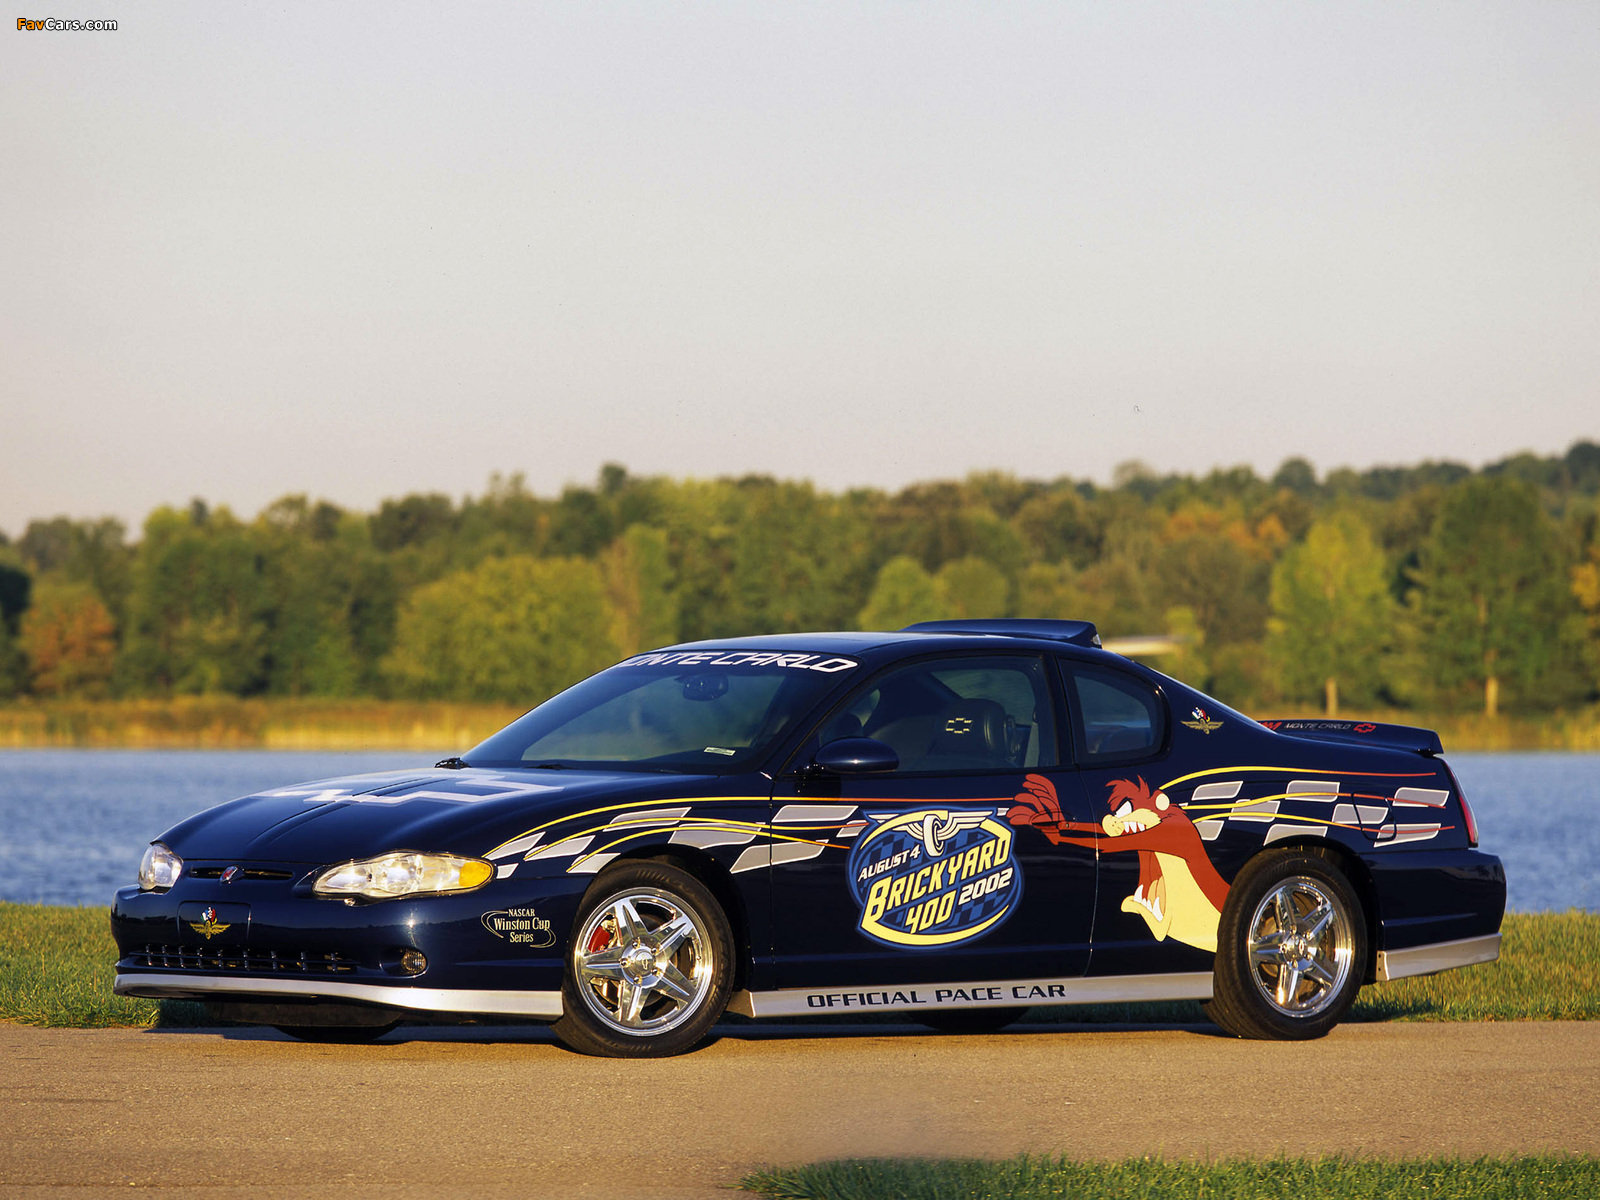 Chevrolet Monte Carlo Brickyard 400 Pace Car 2002 pictures (1600 x 1200)